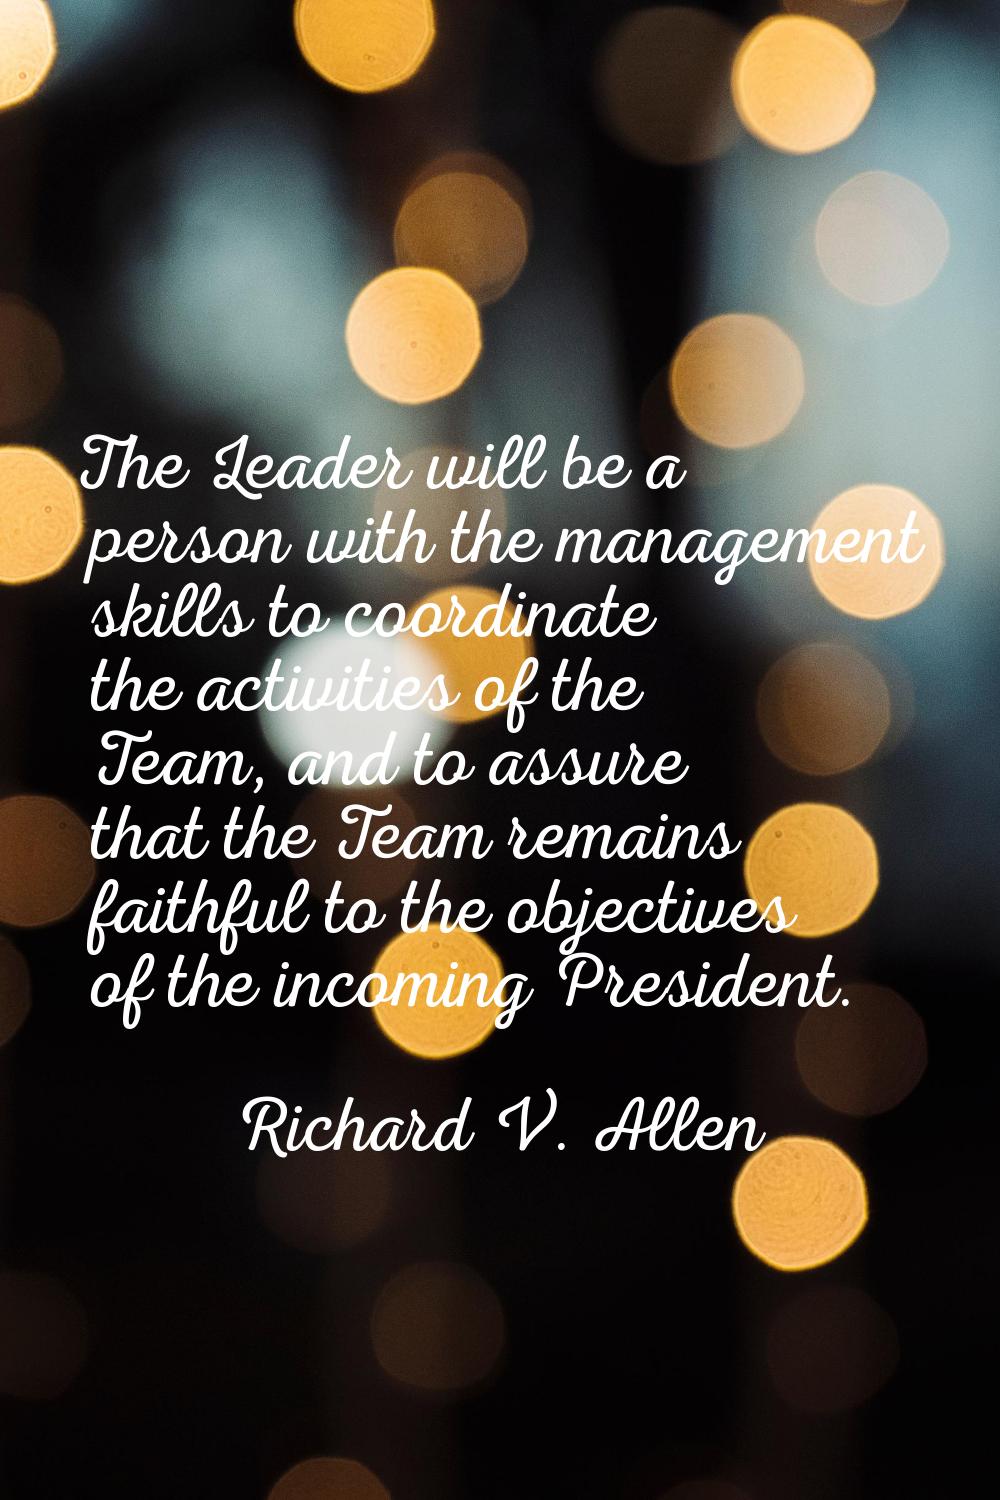 The Leader will be a person with the management skills to coordinate the activities of the Team, an